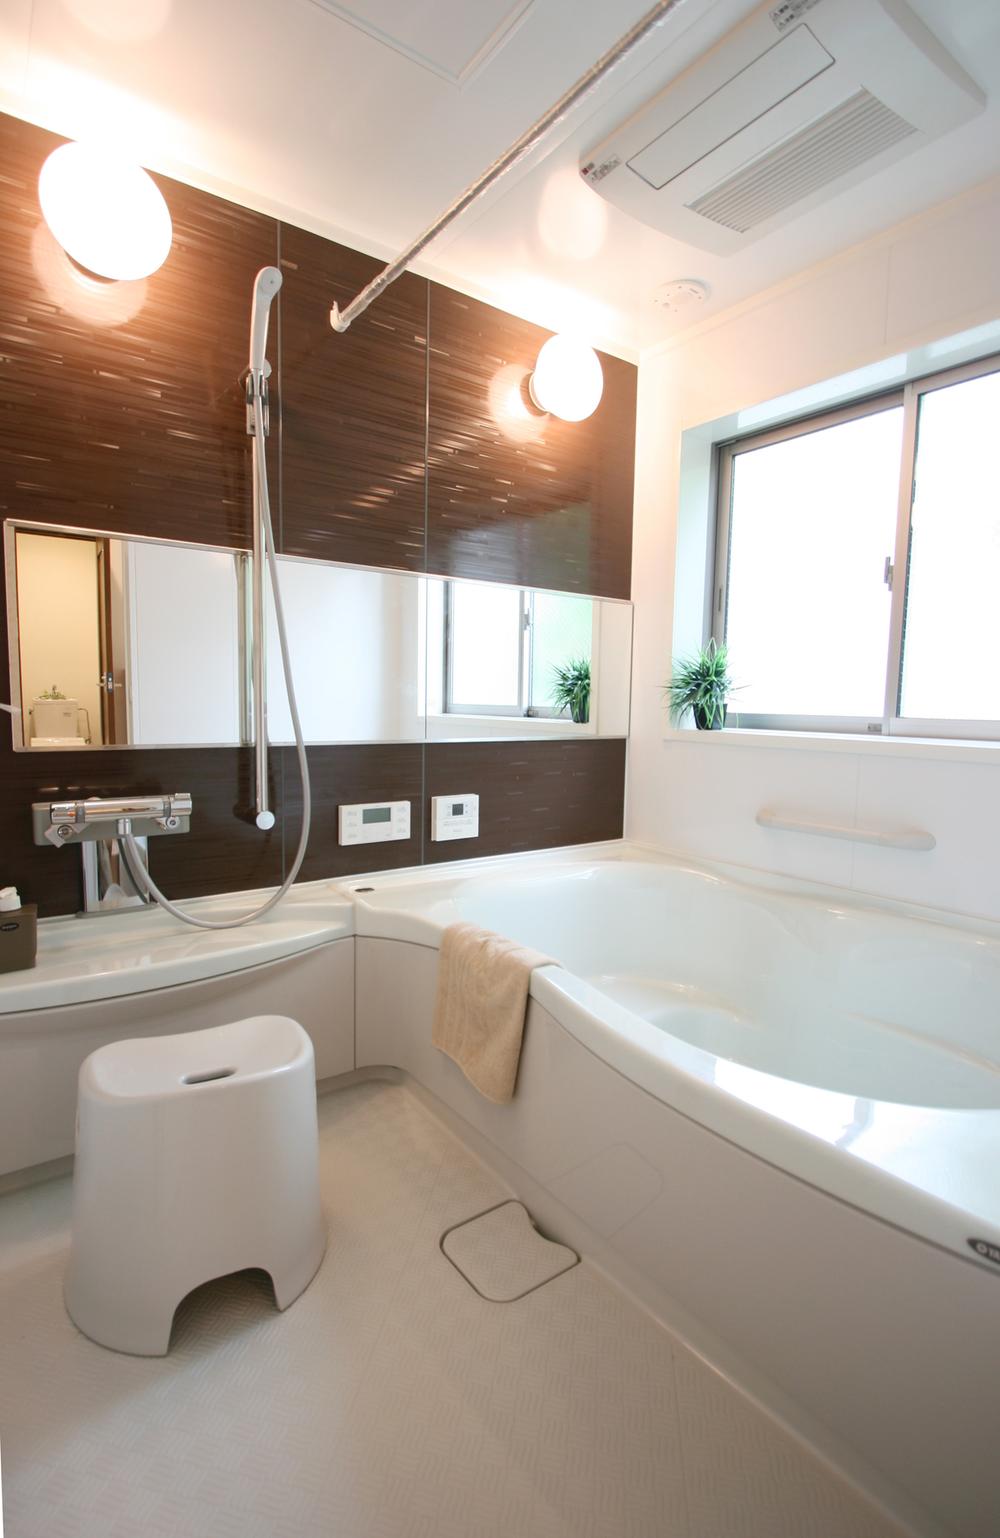 Same specifications photo (bathroom). Our construction cases Mist sauna + surround system standard specification